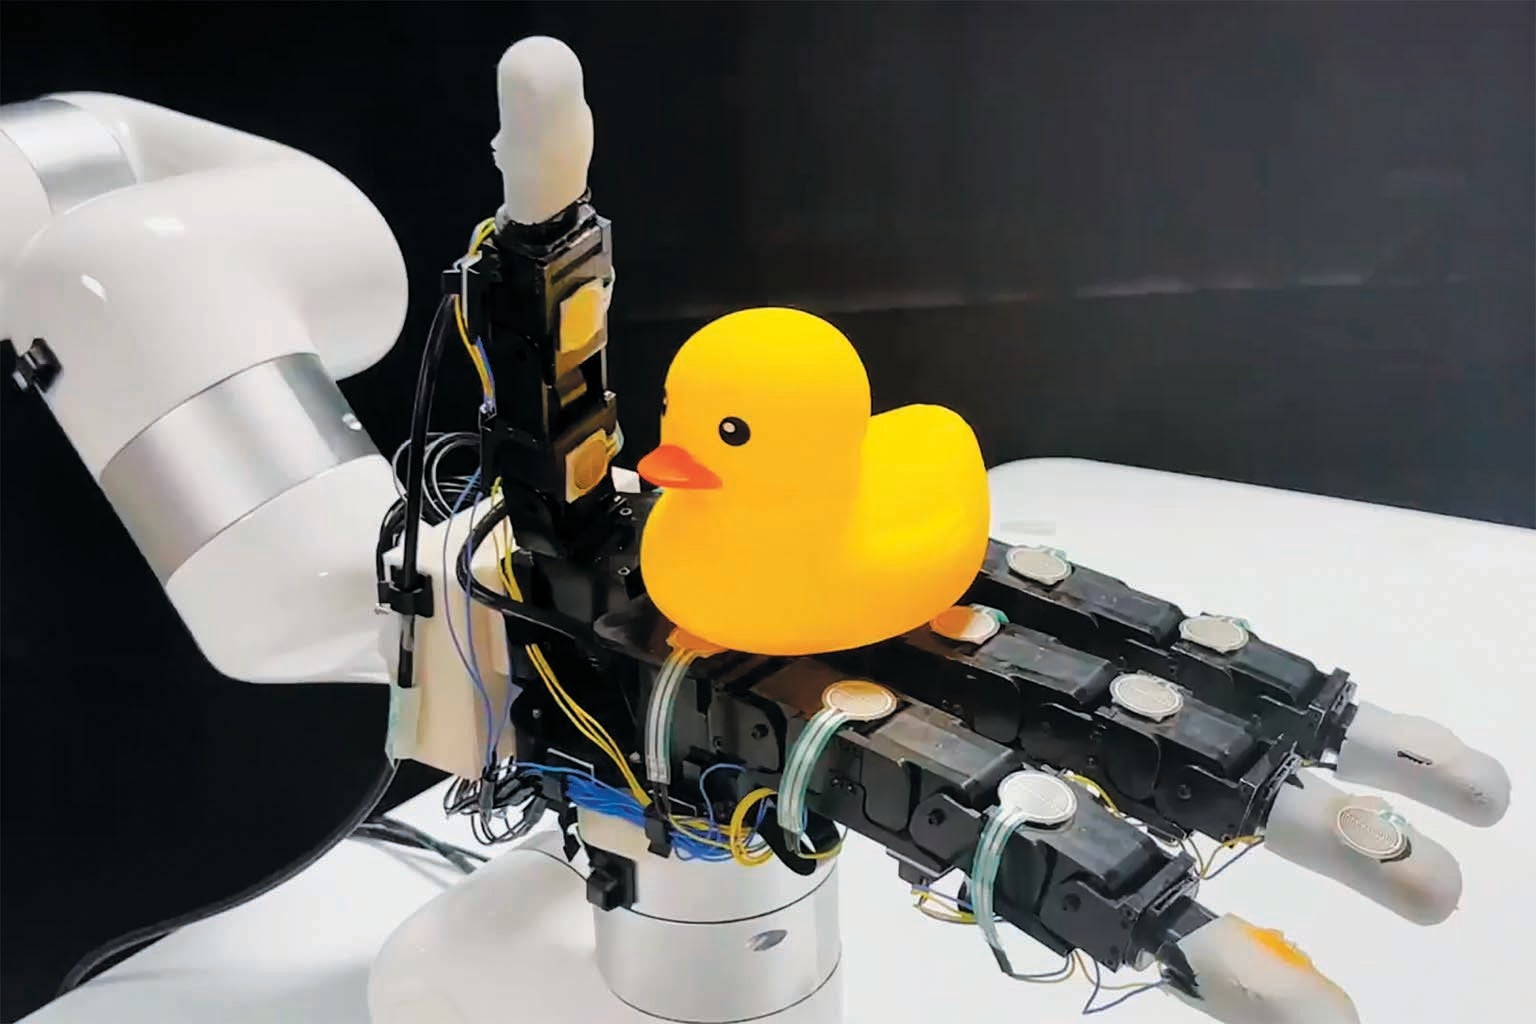 Långiver Grønland Diskant New Robot Hand Works by Feel, Not Sight - Scientific American